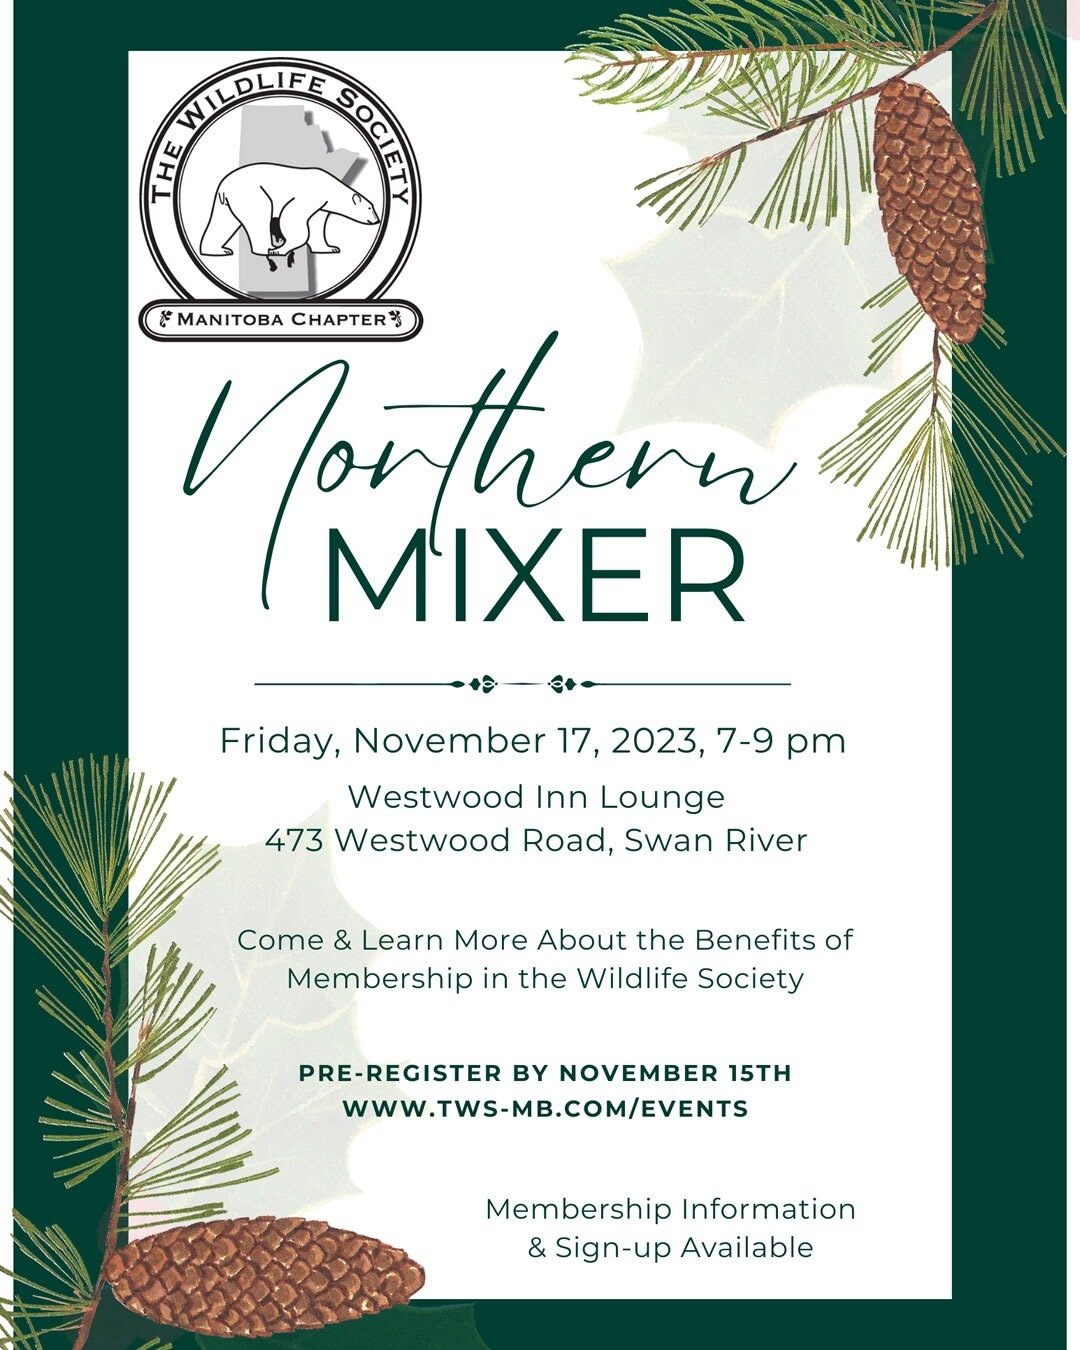 #Mix&amp;Mingle
LAST DAY TO RSVP for the TWS Manitoba Chapter Northern Mixer
Nov 17 (7-9pm) in Swan River
Pre-Registration is required (for the catering)
Pre-Register here = https://buff.ly/49uMzA2